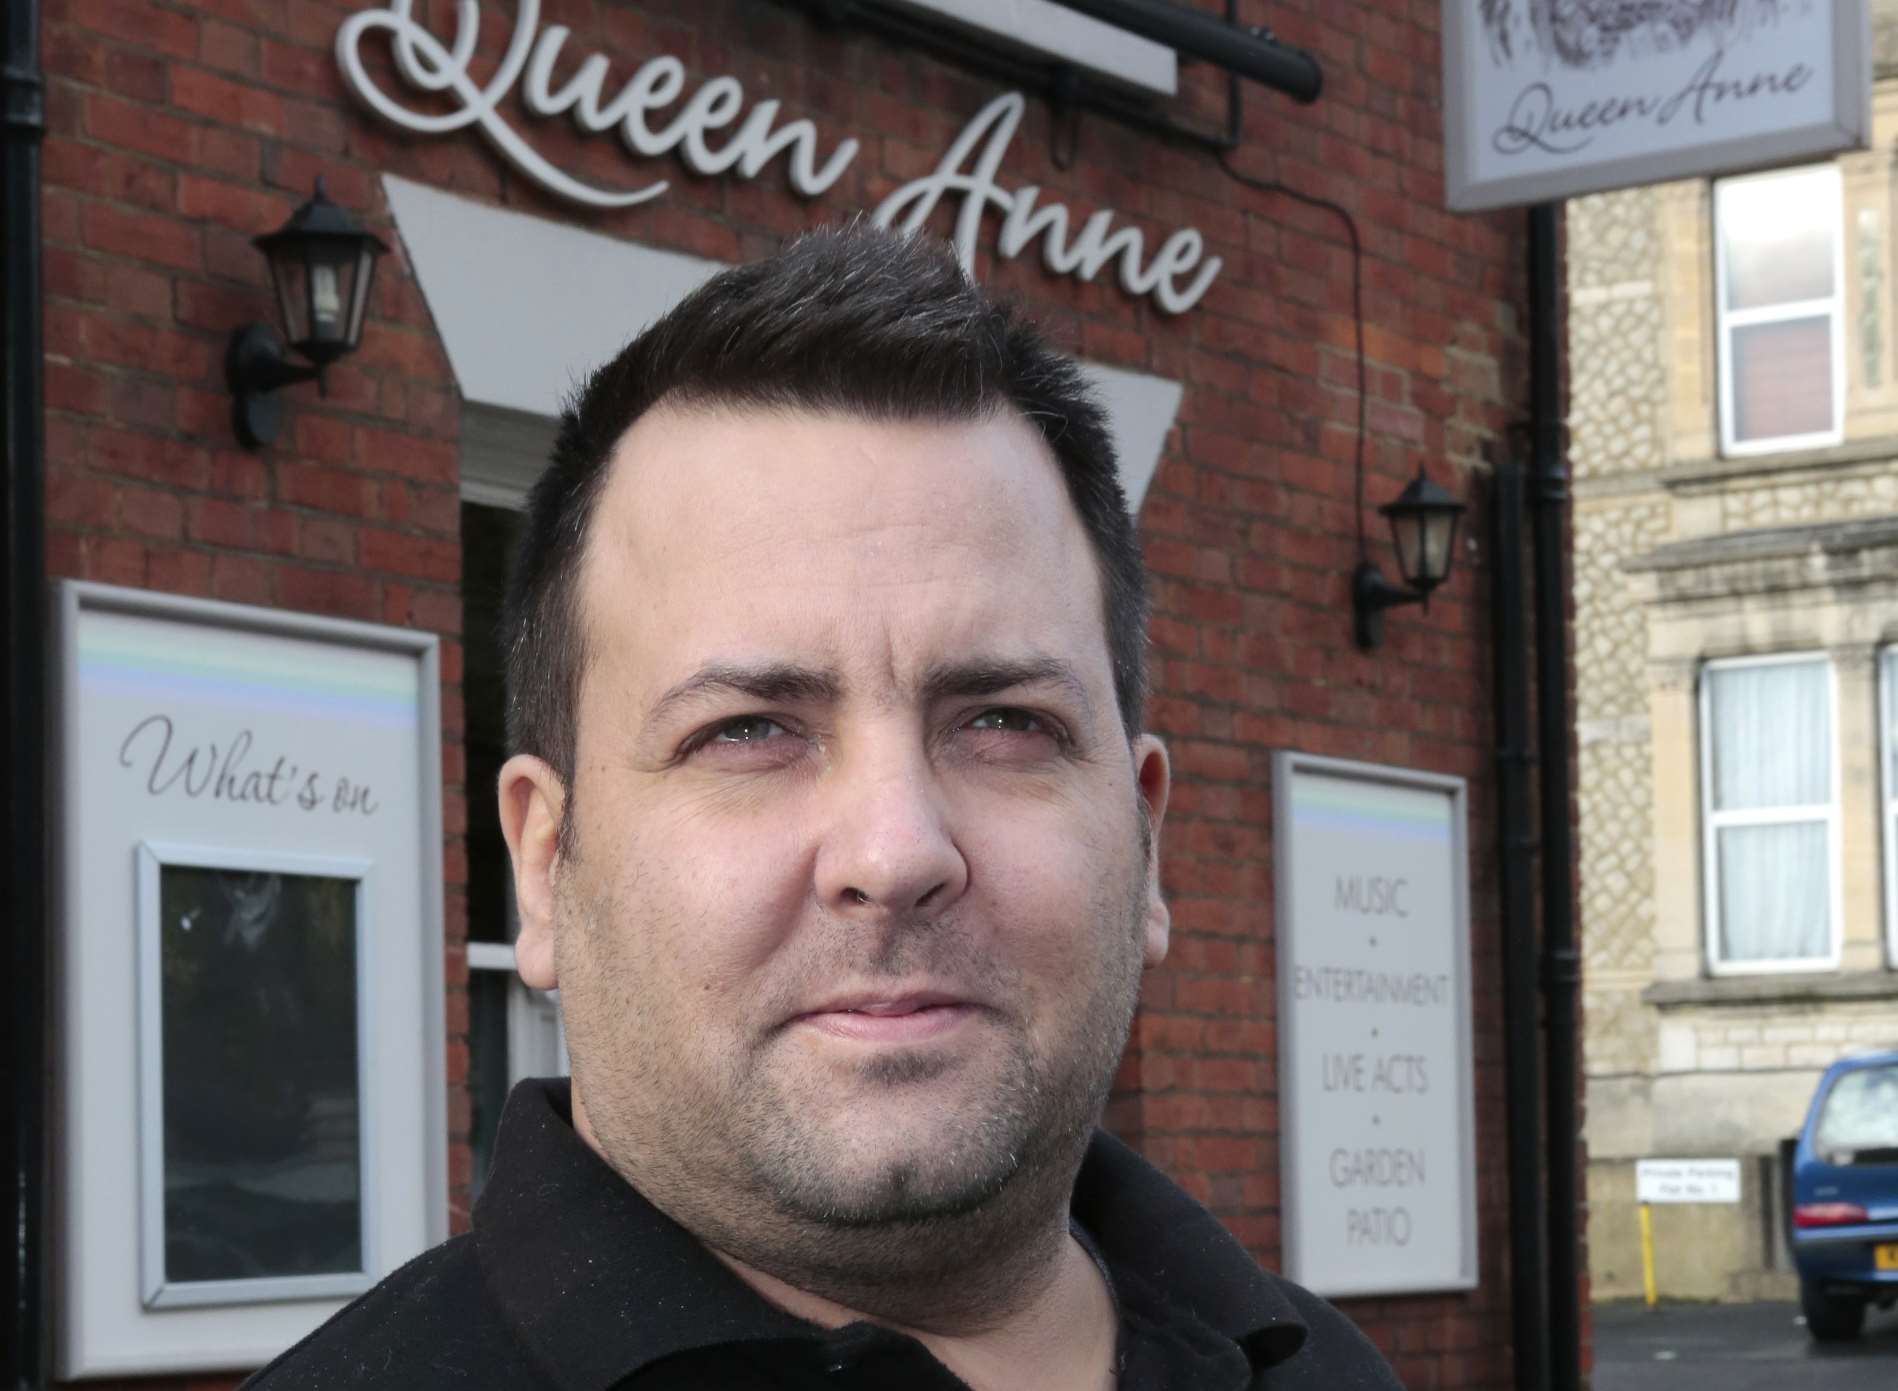 Landlord Ron Hall has been served notice to leave the Queen Anne. Picture: Martin Apps